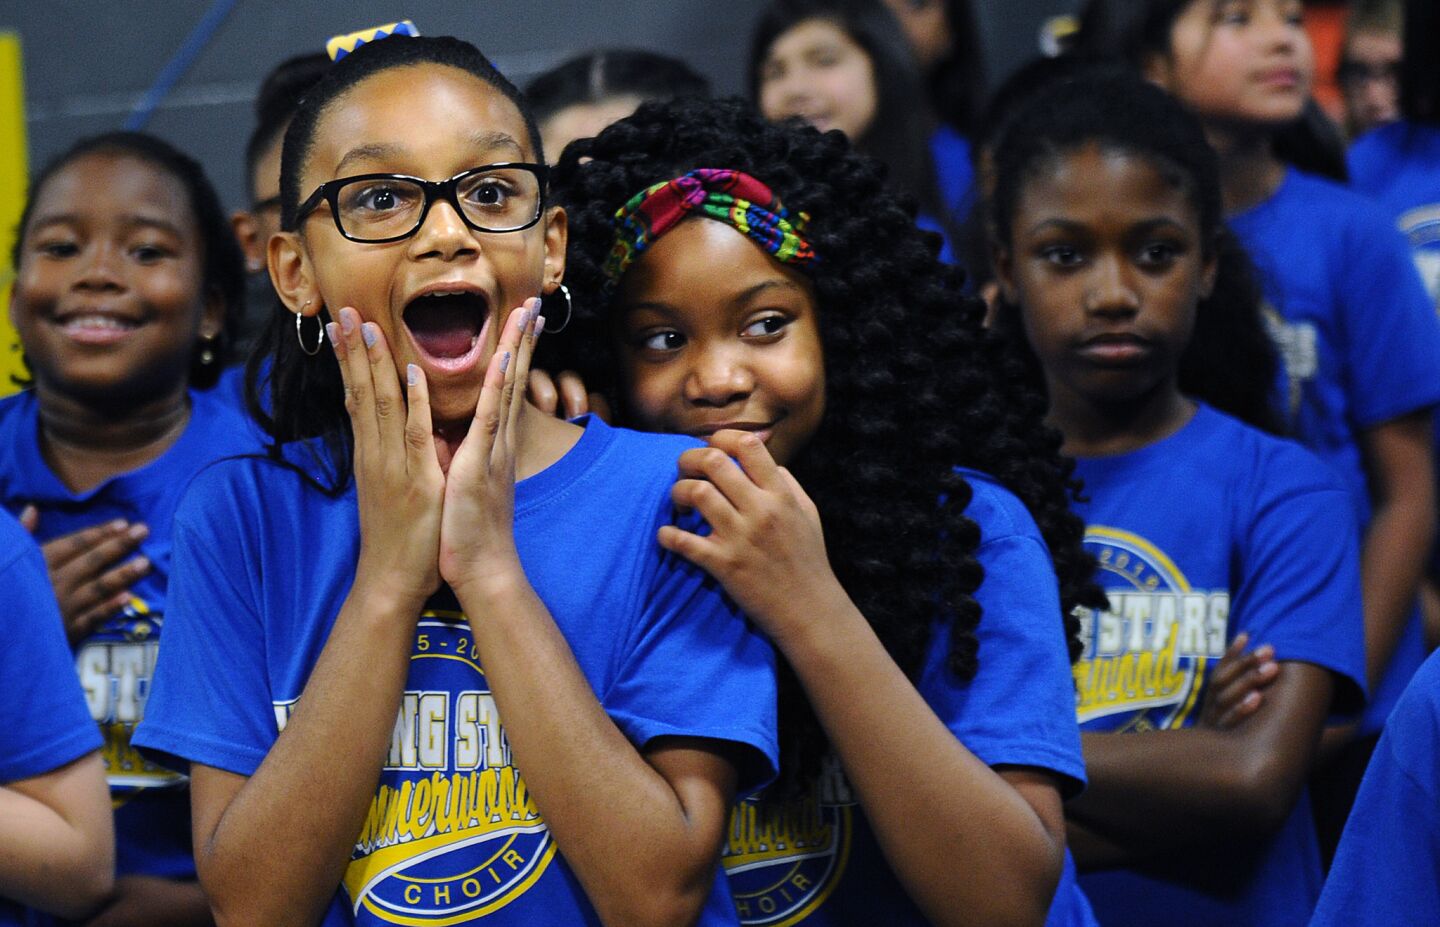 Young pregame performers react as Kobe Bryant approaches before a game with the Rockets in Houston.